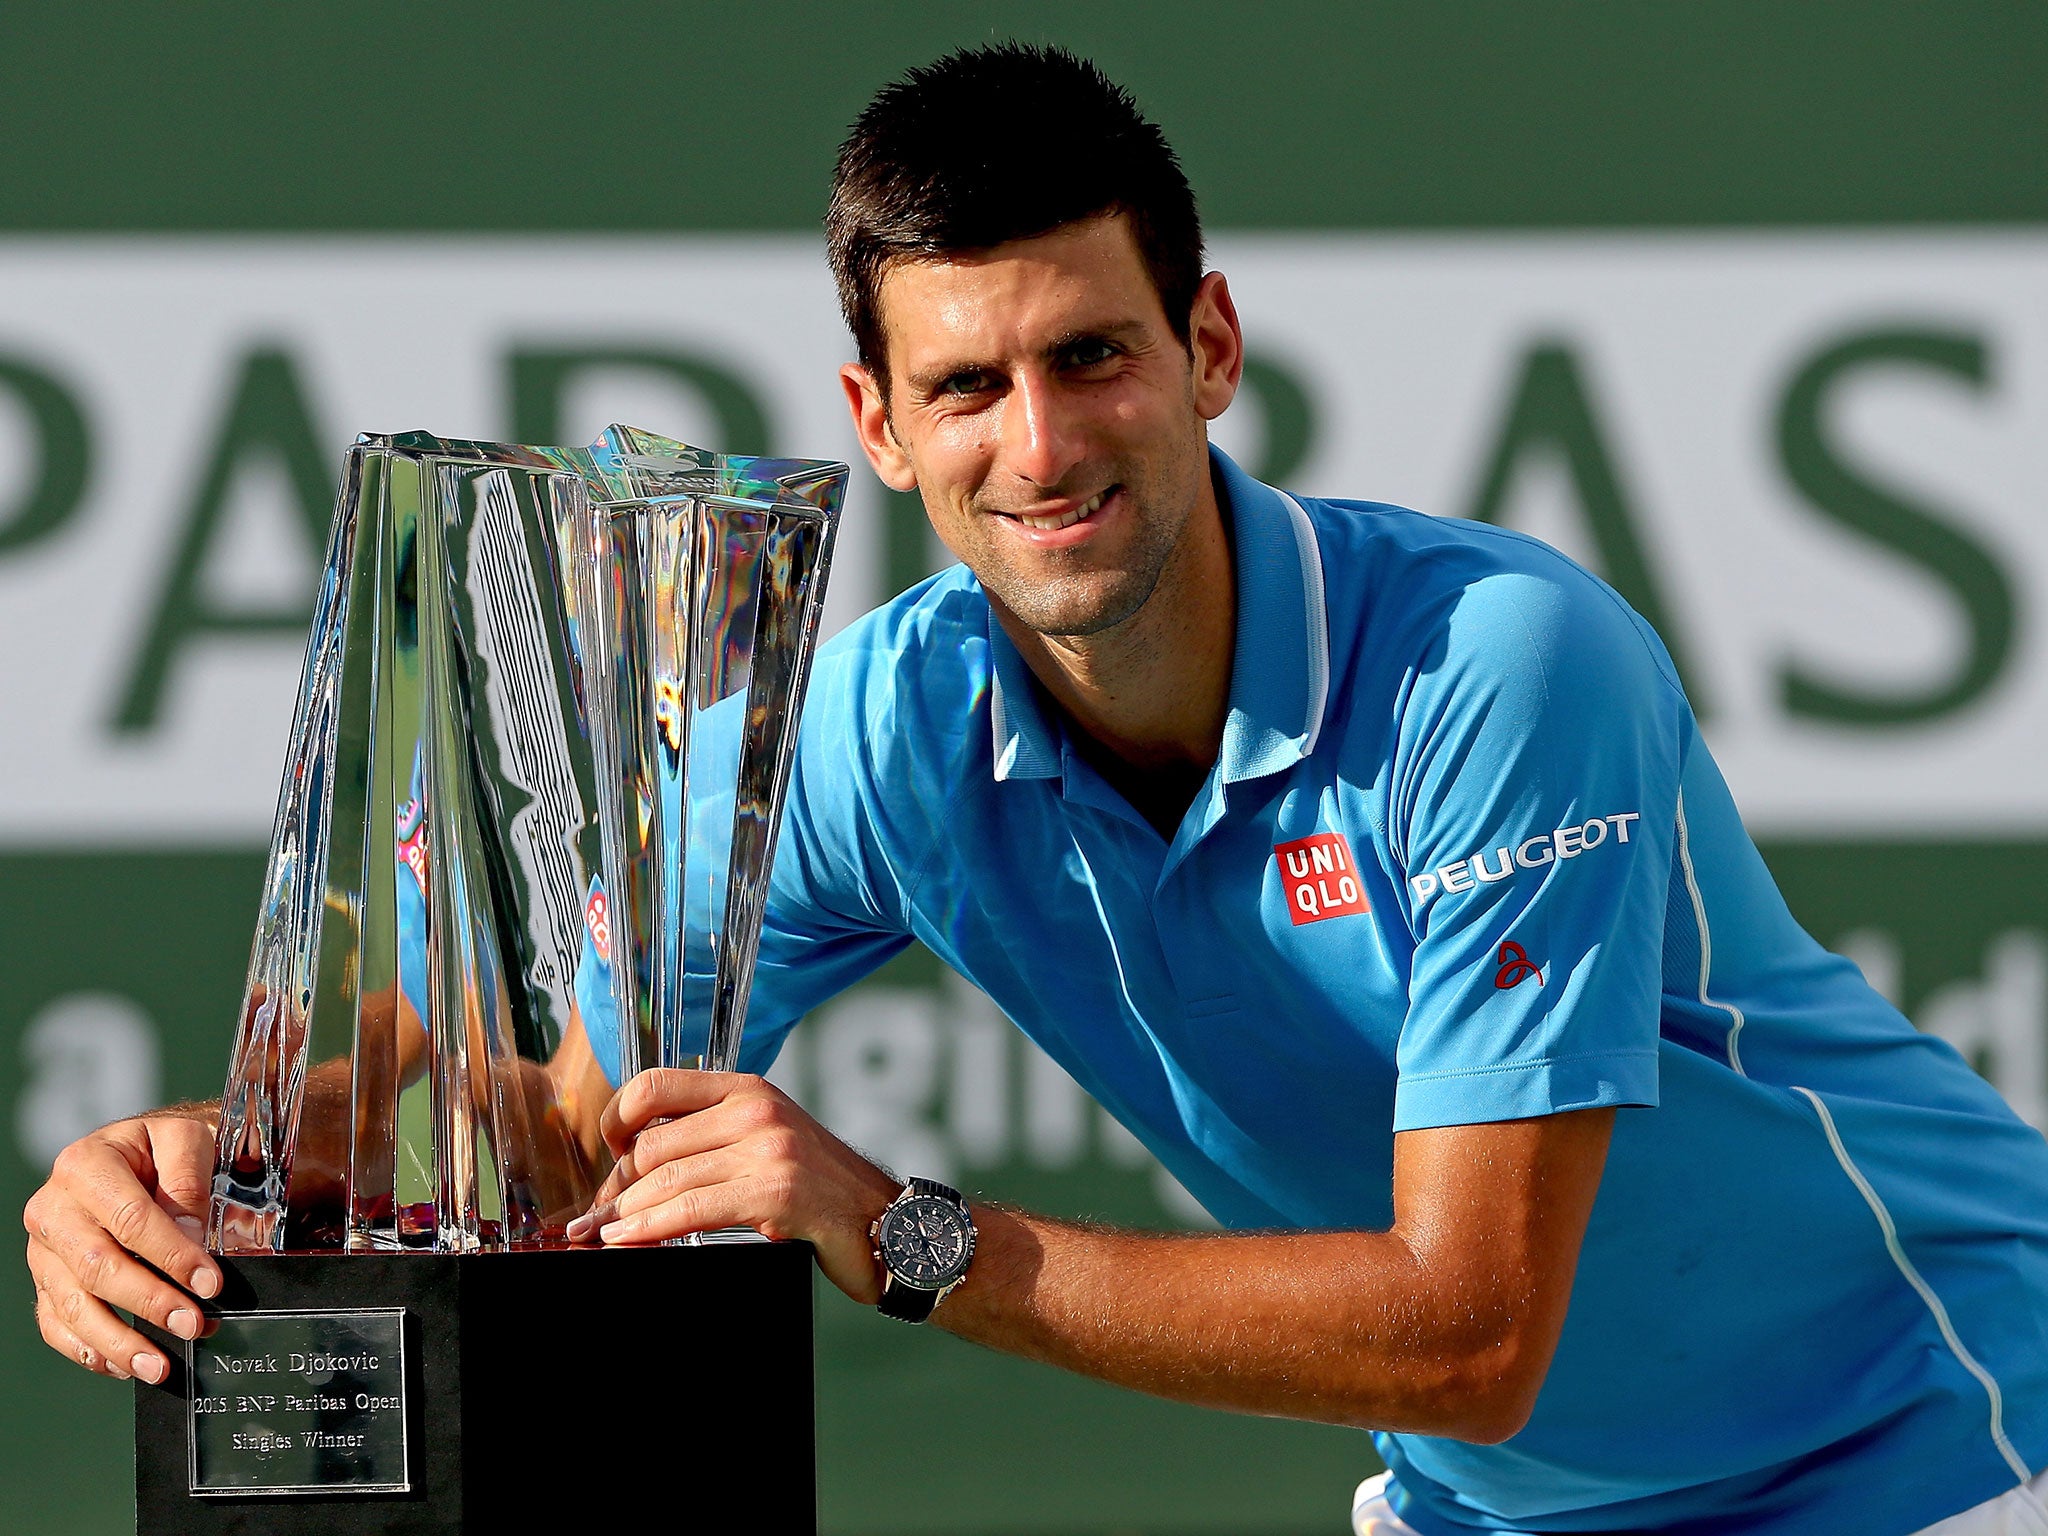 Djokovic forced a total of five break points in the opening set